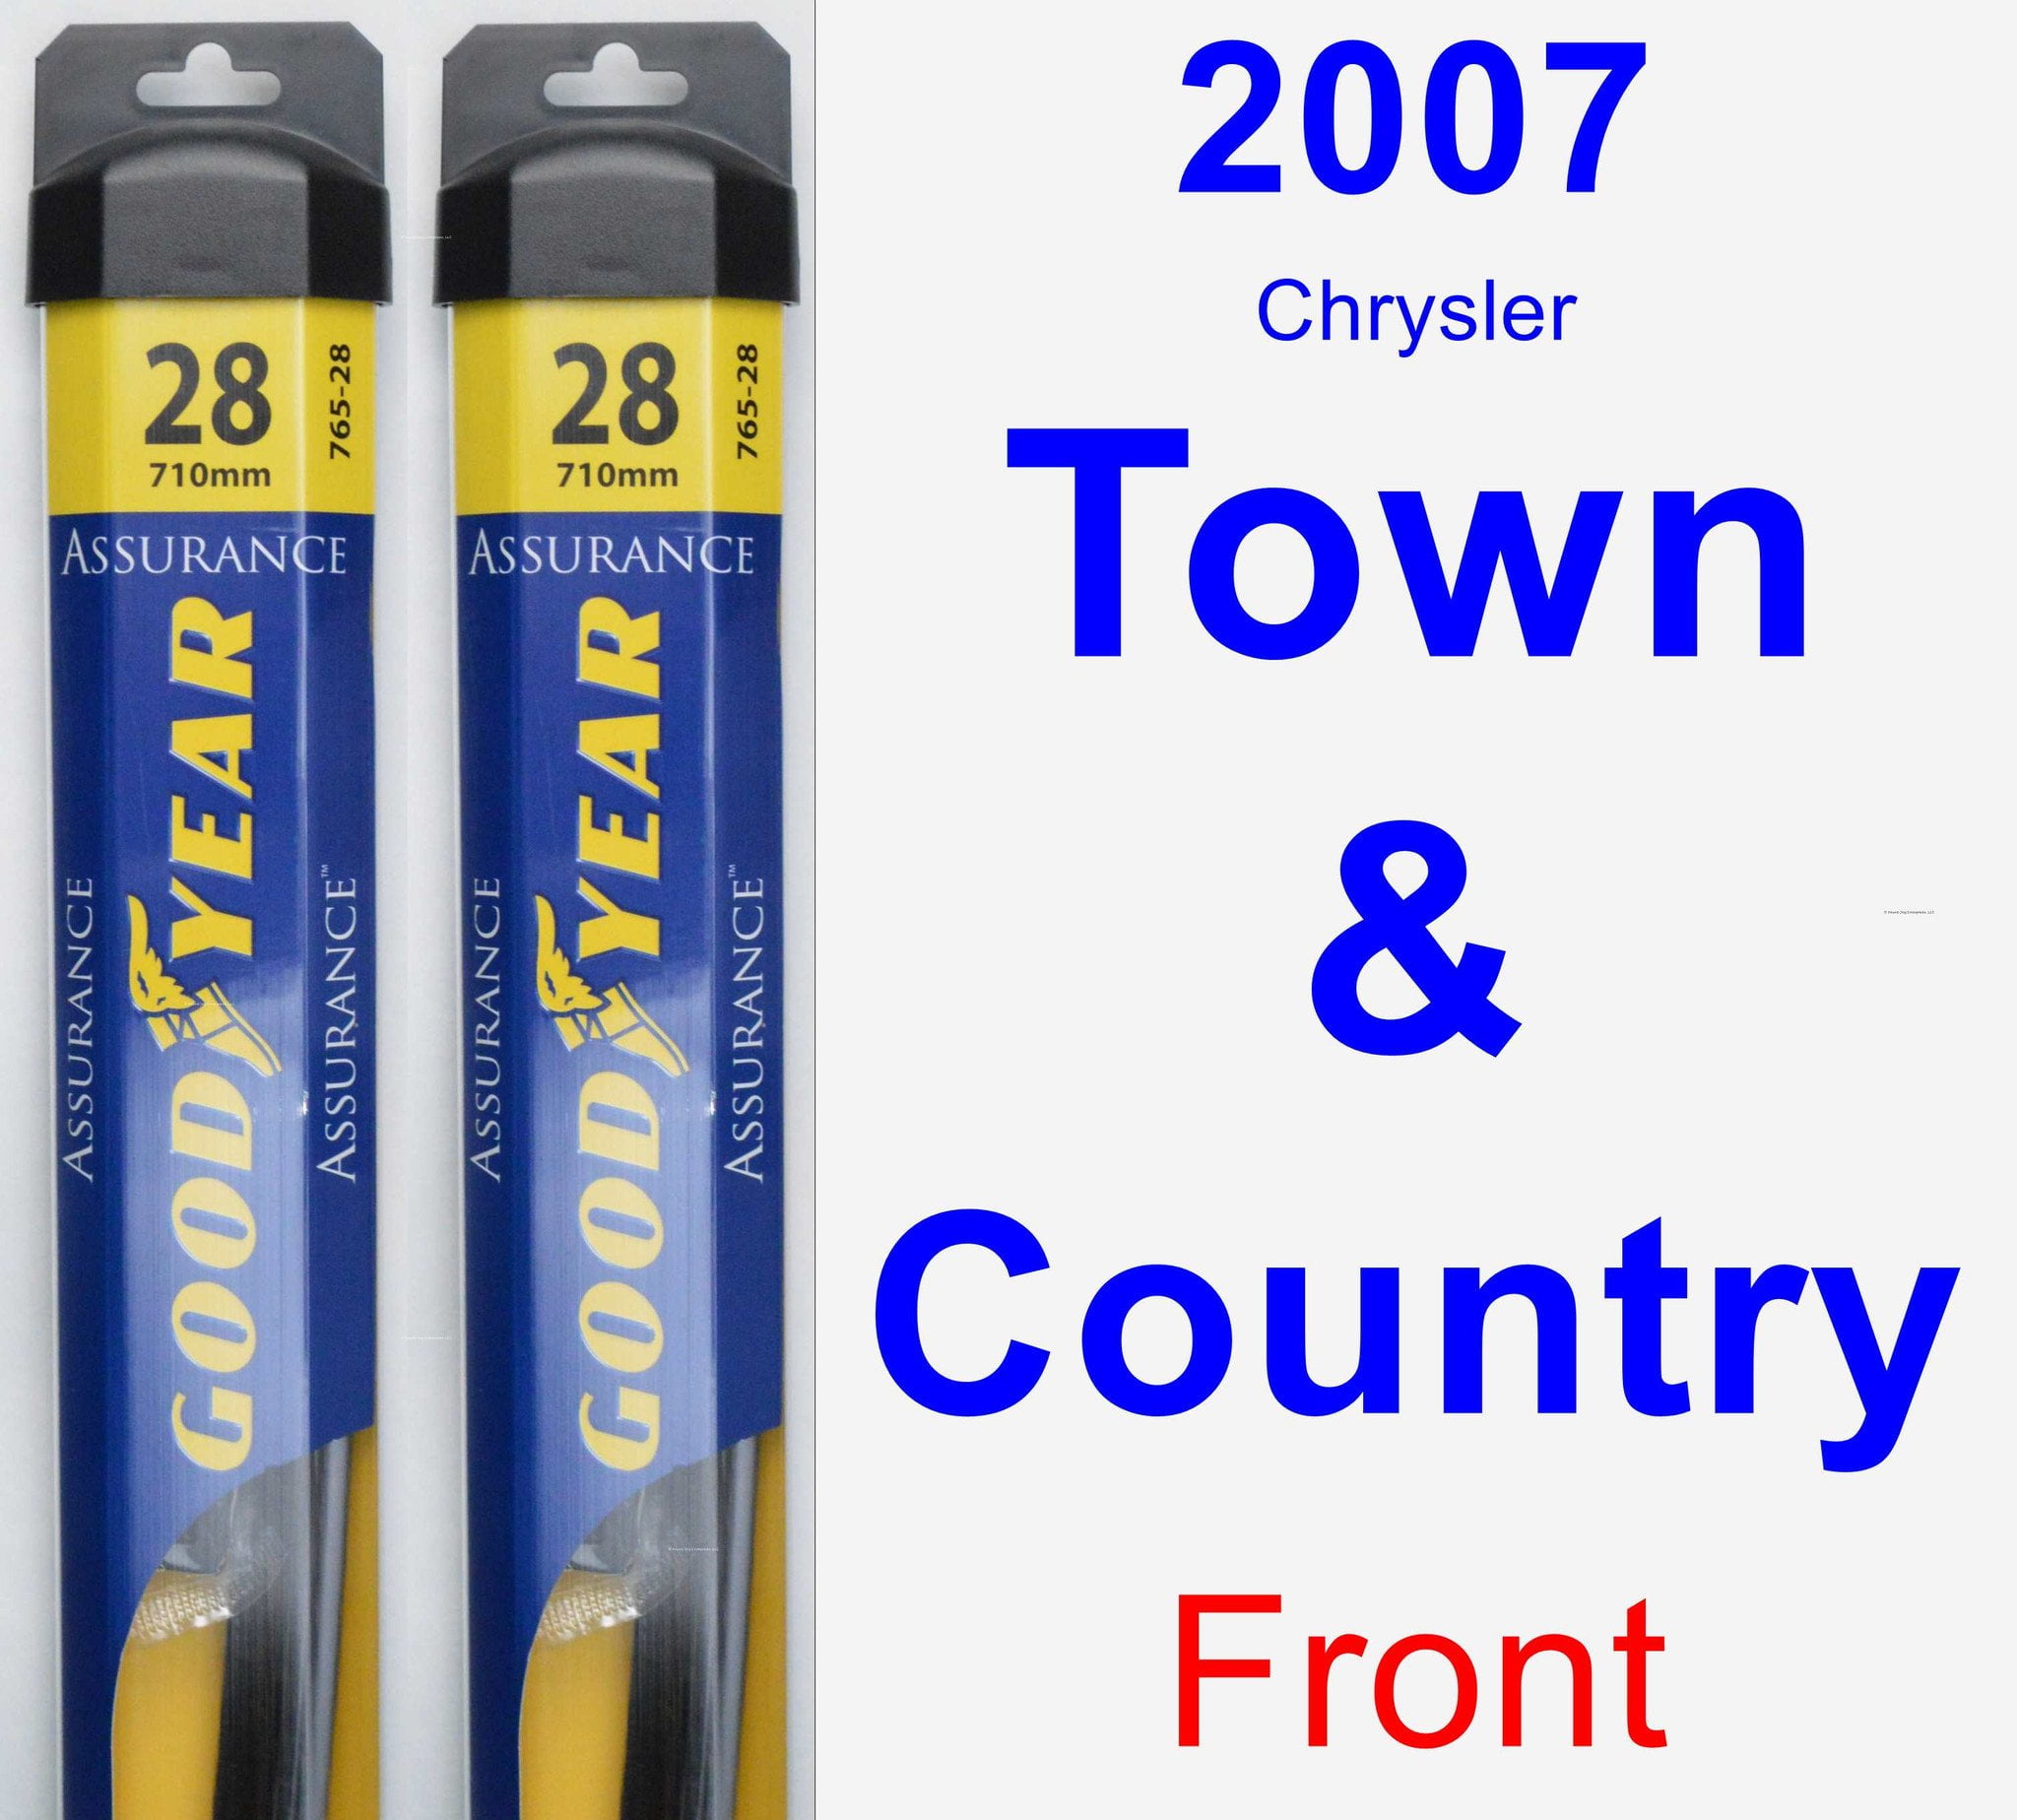 2007 Chrysler Town & Country Wiper Blade Set/Kit (Front) (2 Blades) - Assurance - Walmart.com 2007 Chrysler Town And Country Wiper Blades